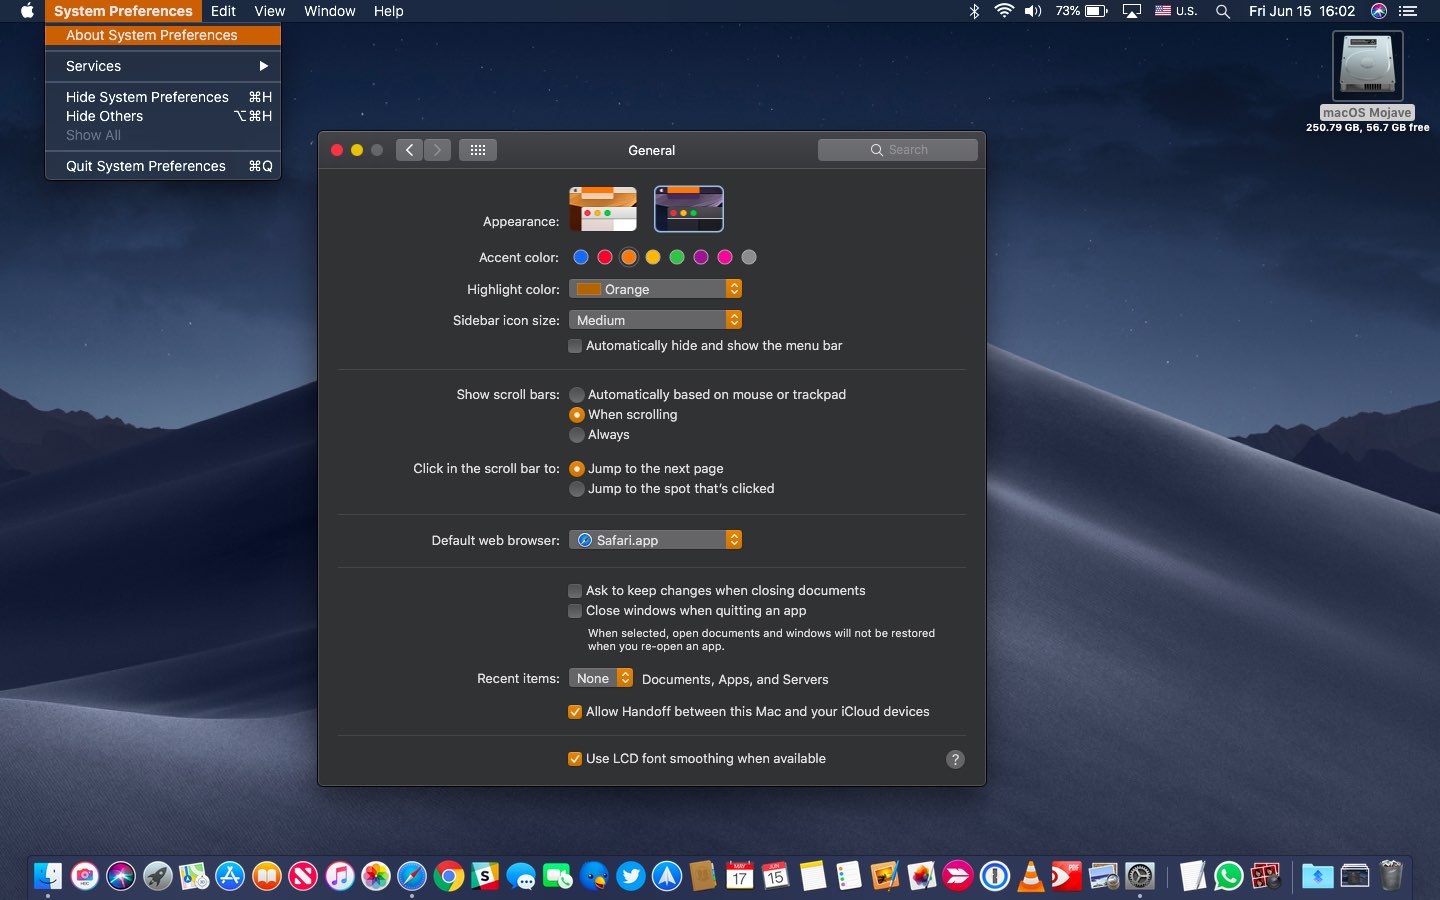 macOS Mojave Dark Mode with the orange accent and highlight color